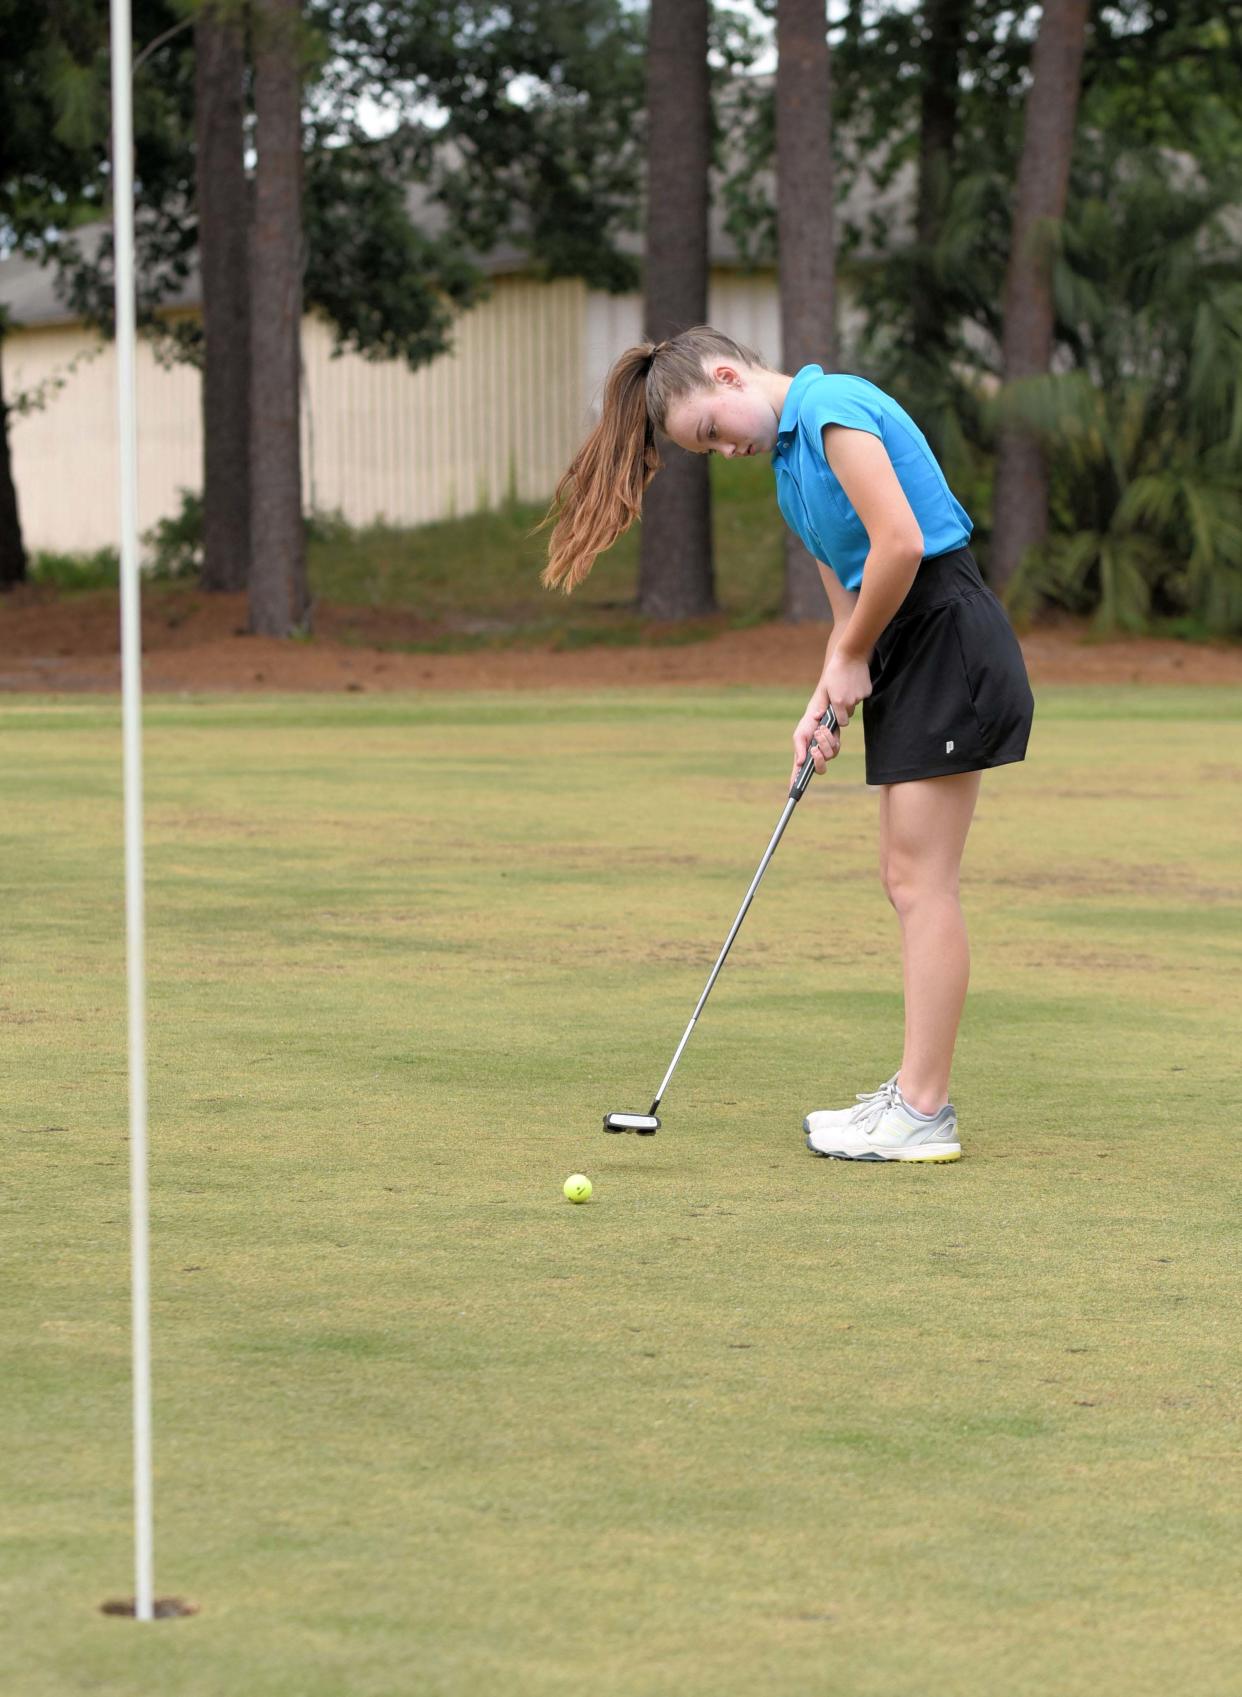 Effingham County High School freshman Natalie Altman makes a 20-foot putt at golf practice Thursday, May 12, 2022, at Lost Plantation in Rincon.